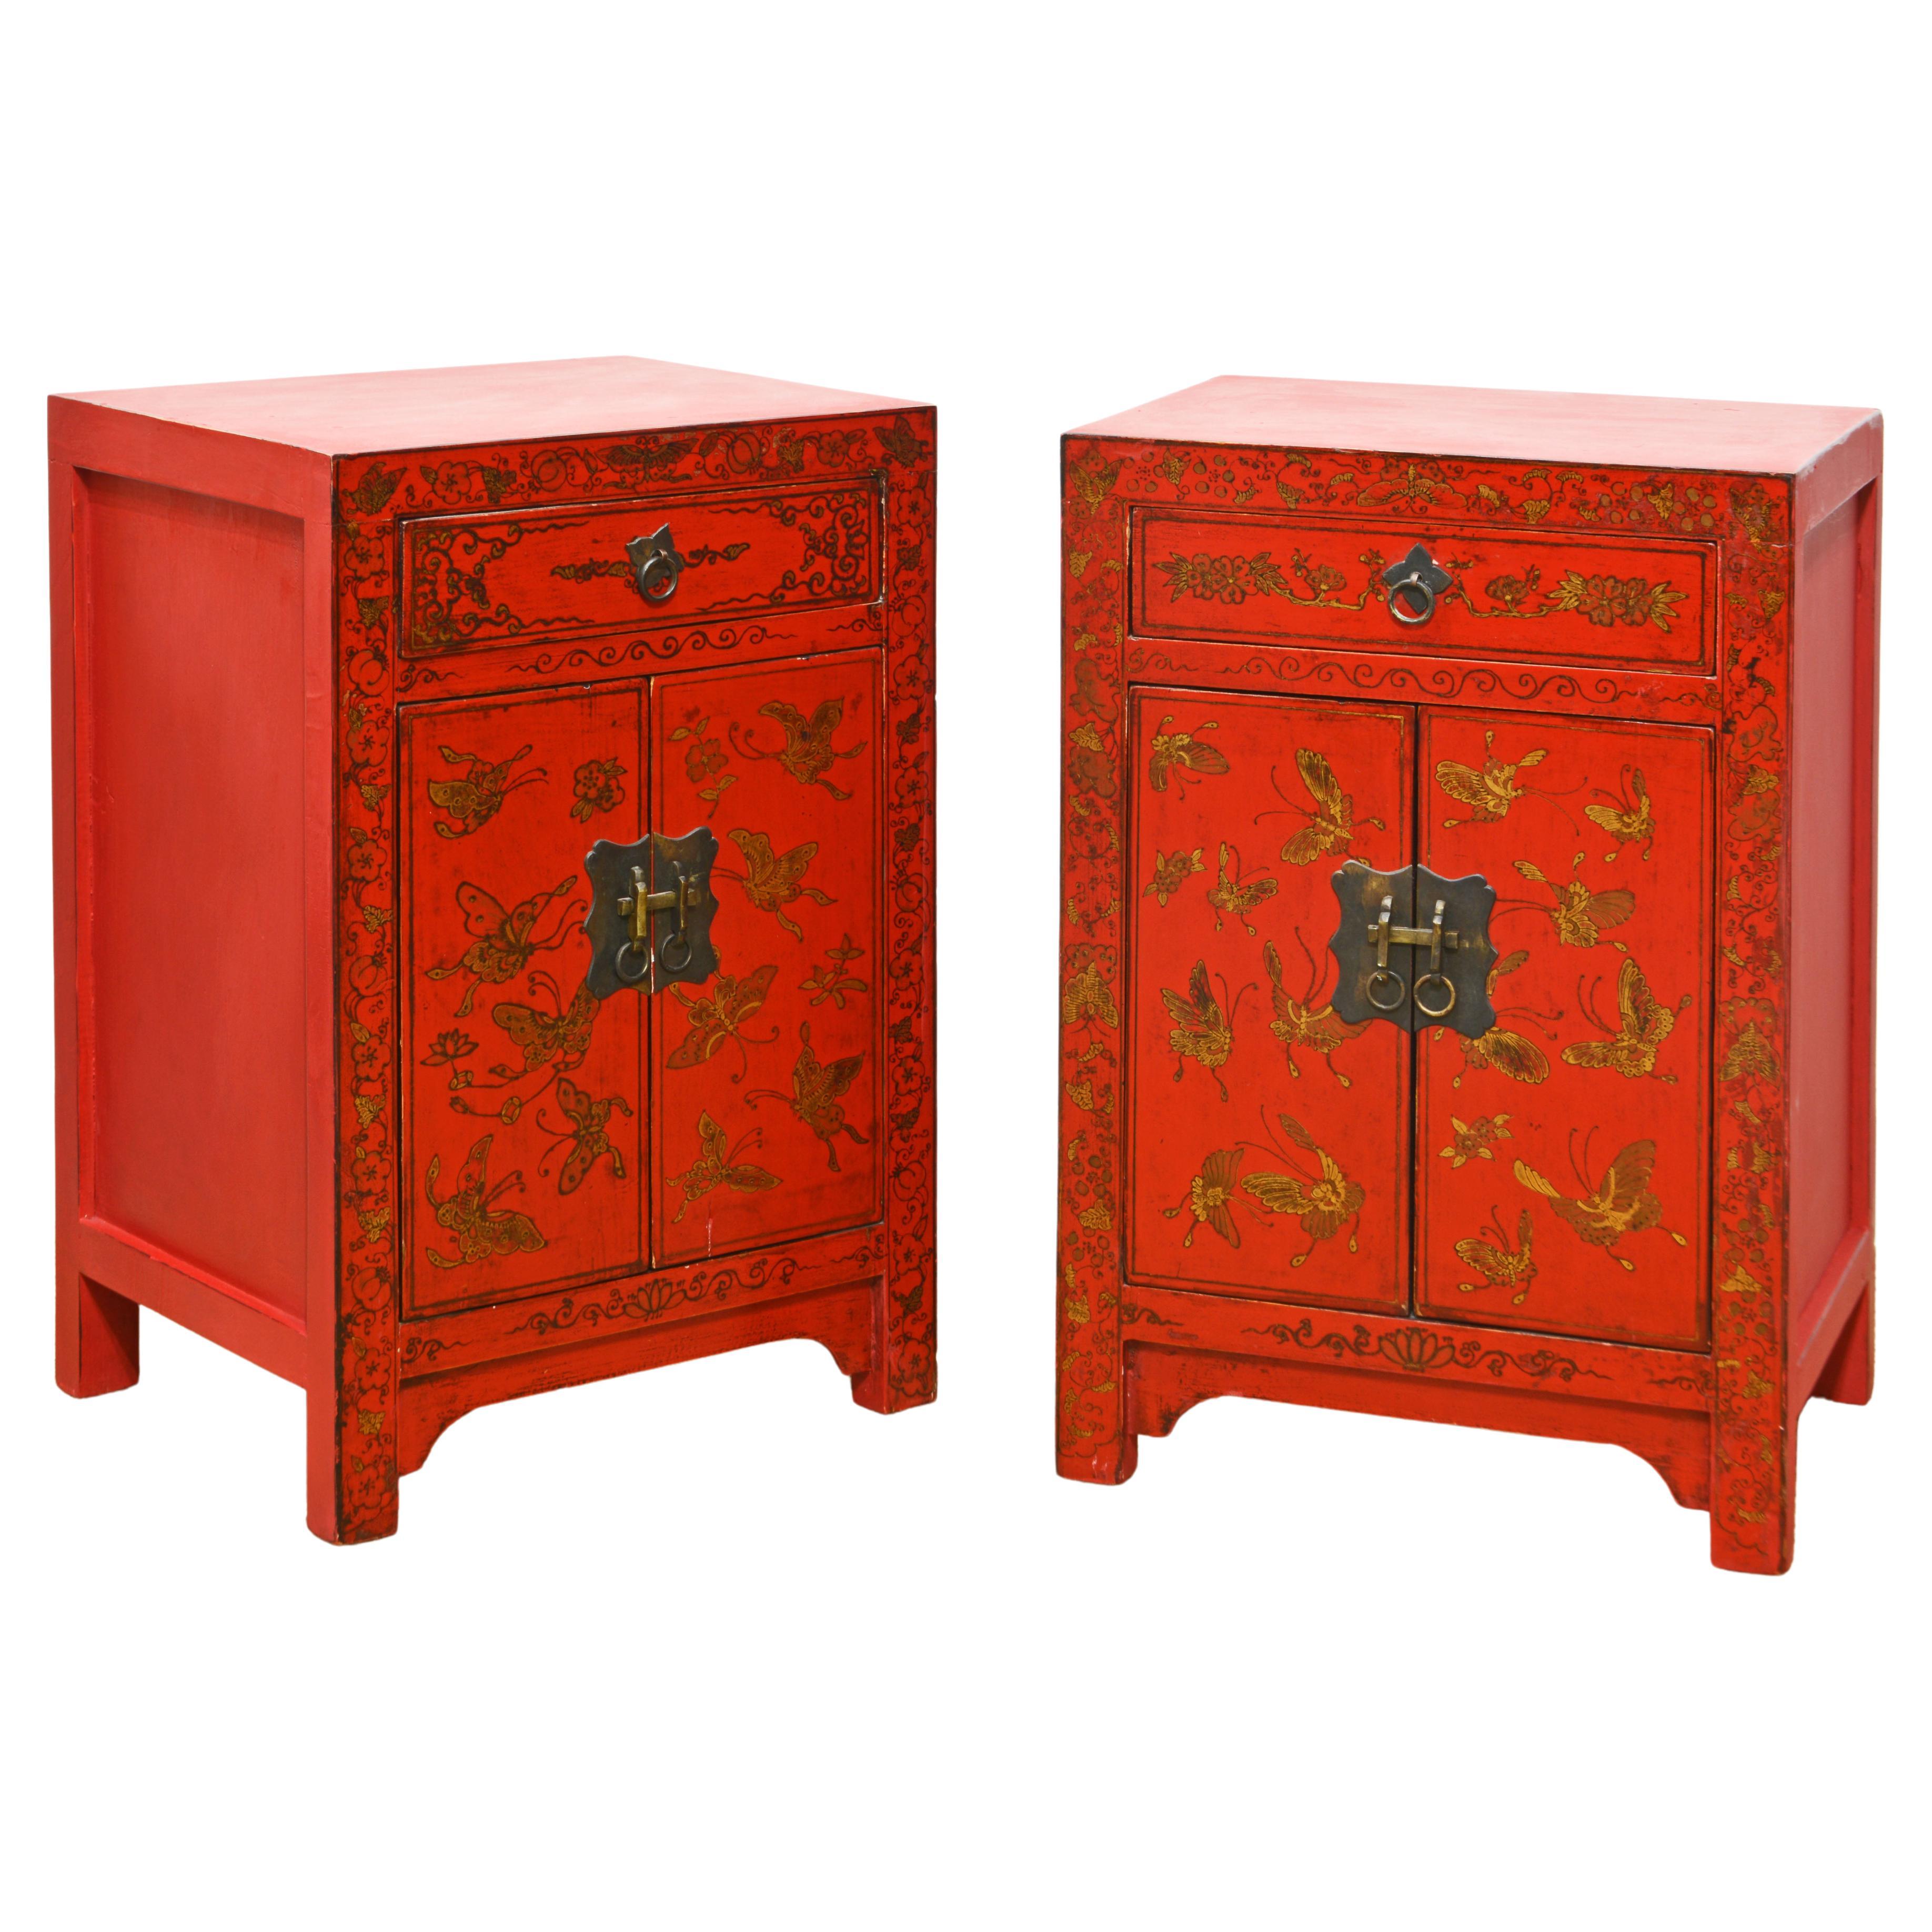 Pair of Vintage Chinese Lacquered Butterfly Decorated Night Stands or End Tables